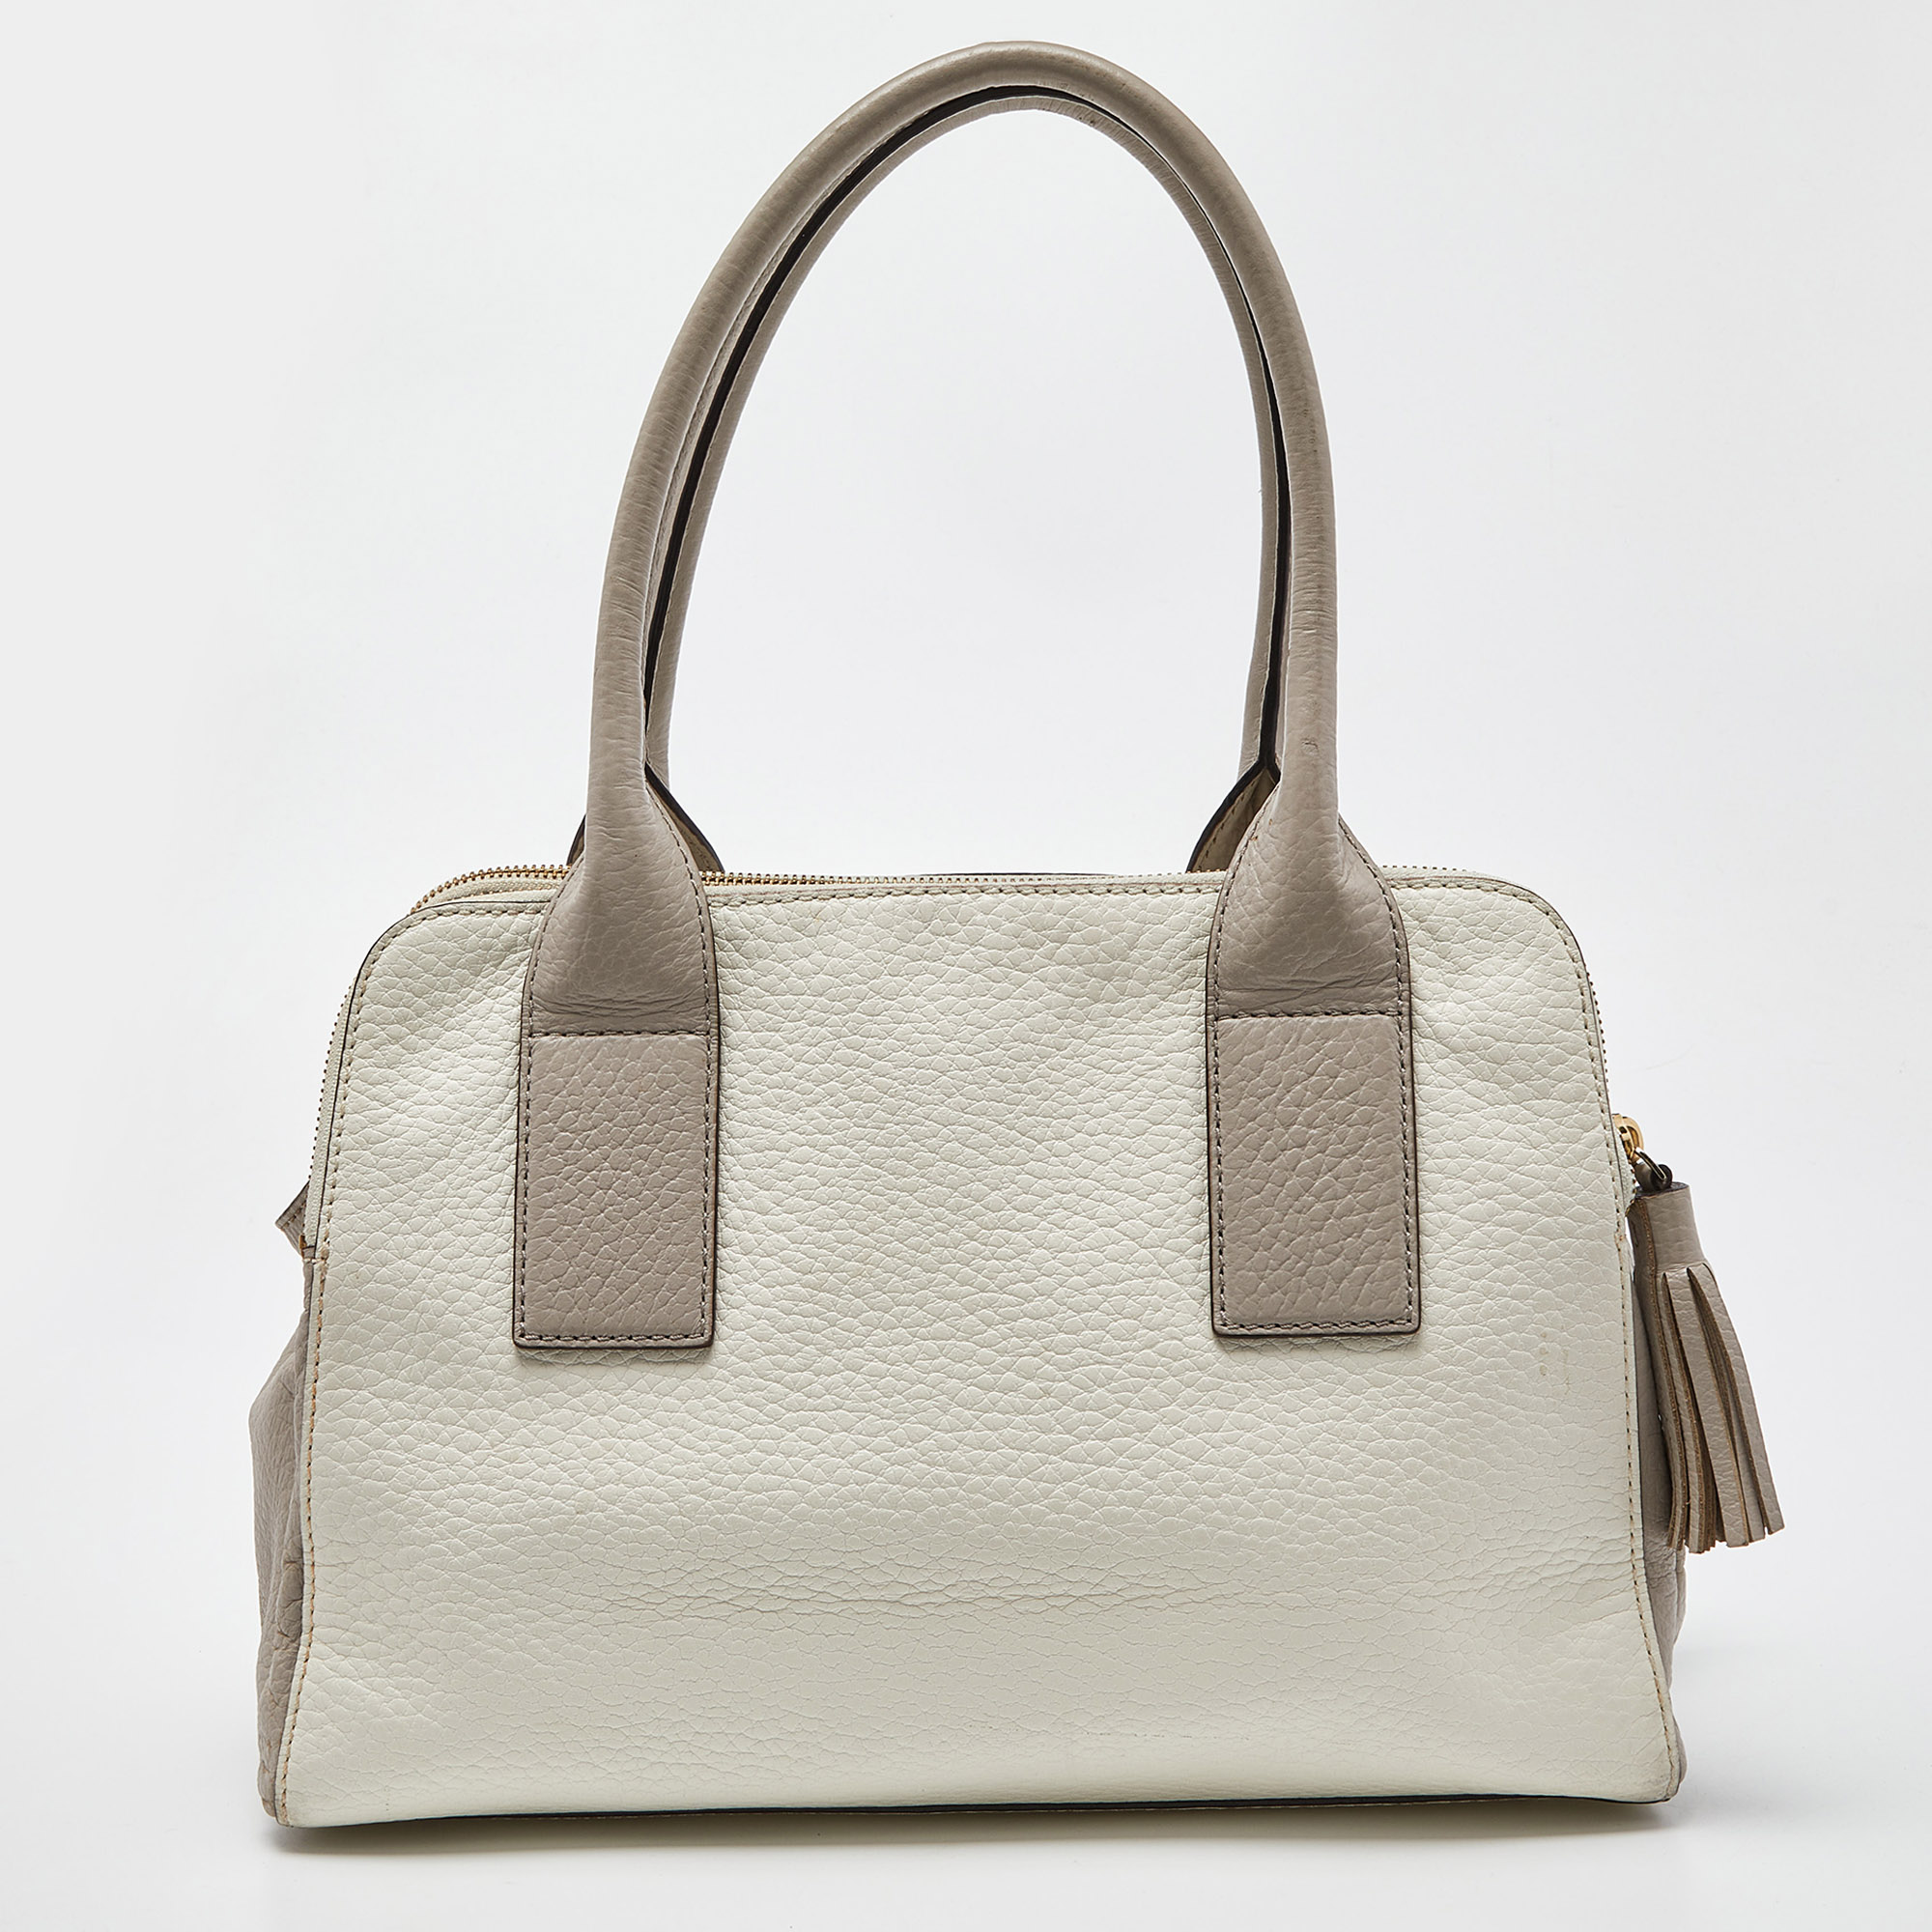 Kate Spade Off White/Grey Leather Double Zip Satchel